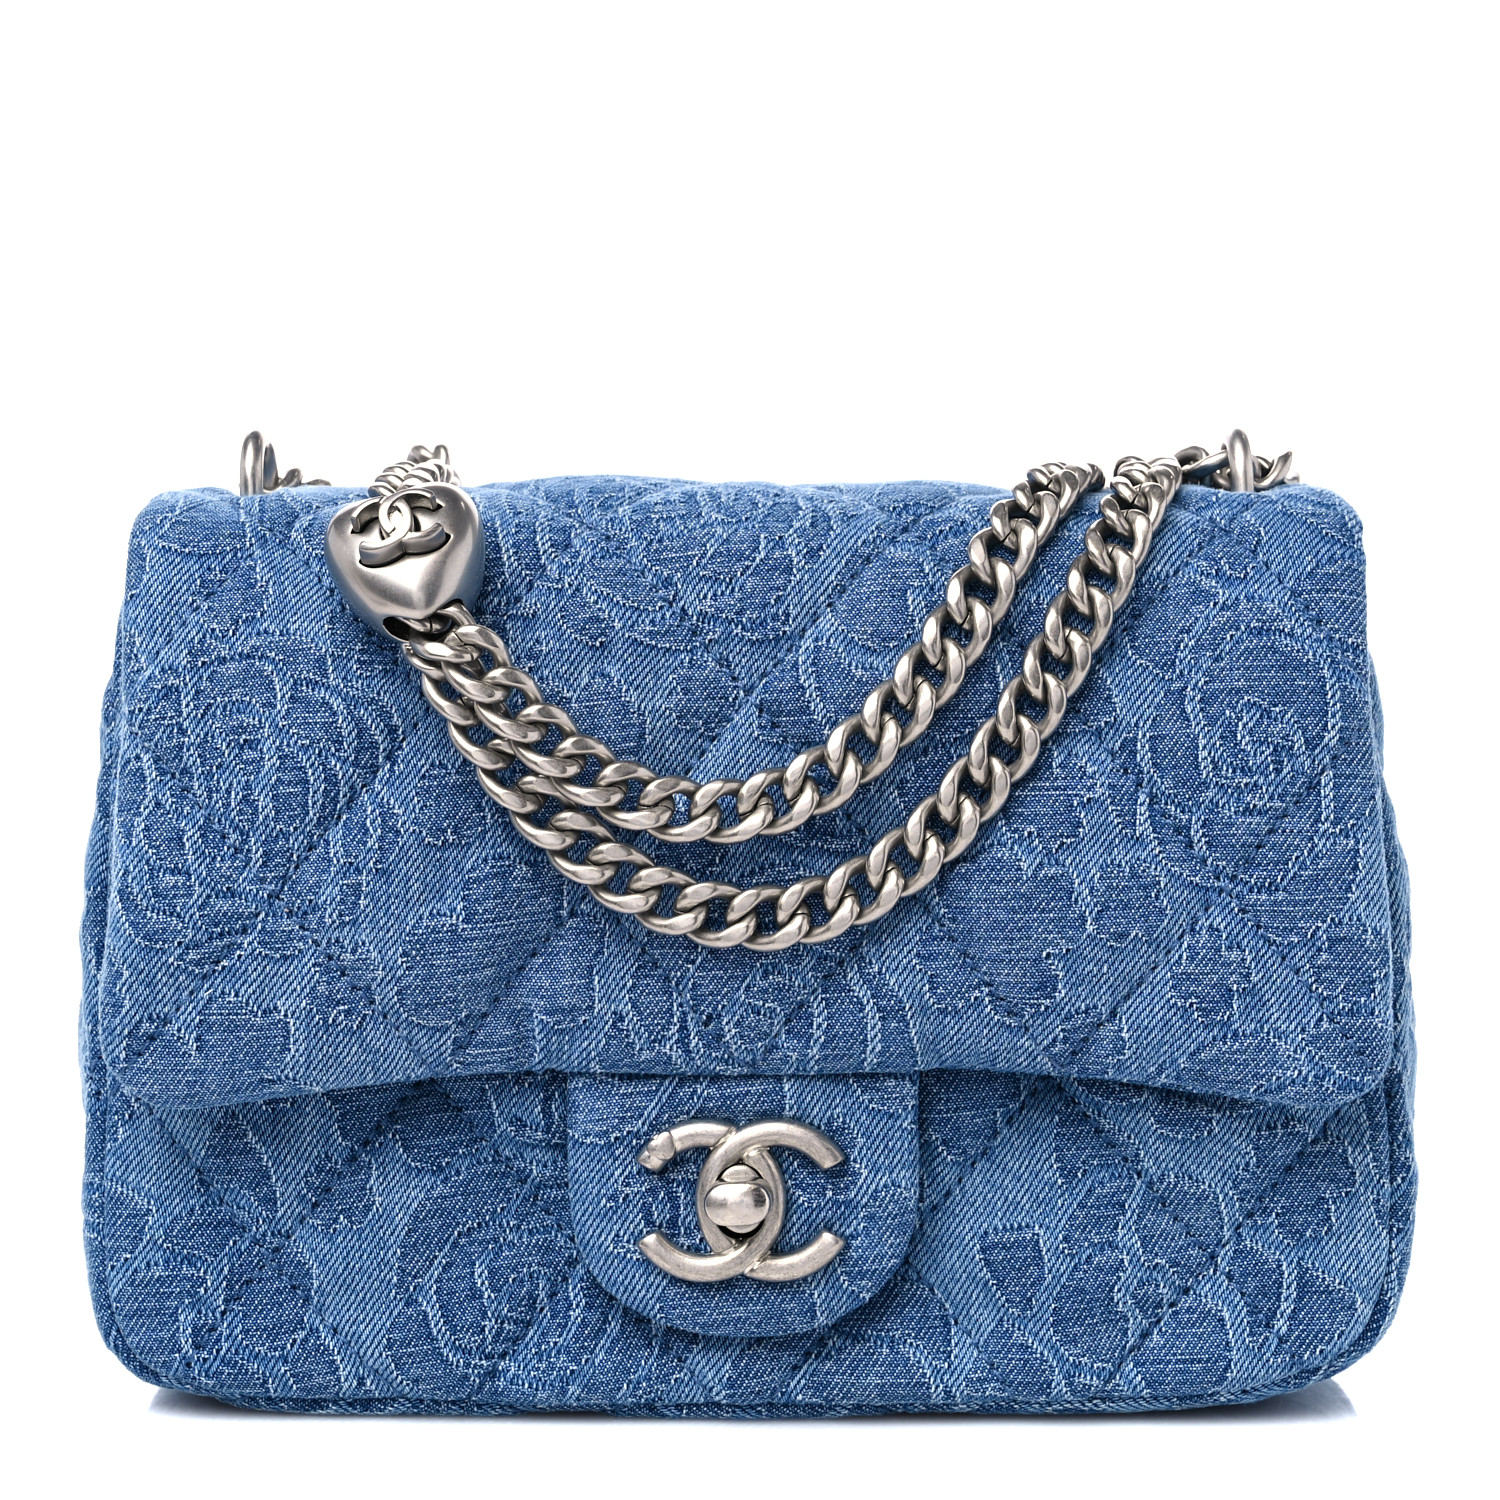 image of CHANEL Denim Quilted Camellia Sweetheart Mini Flap in the color Blue by FASHIONPHILE